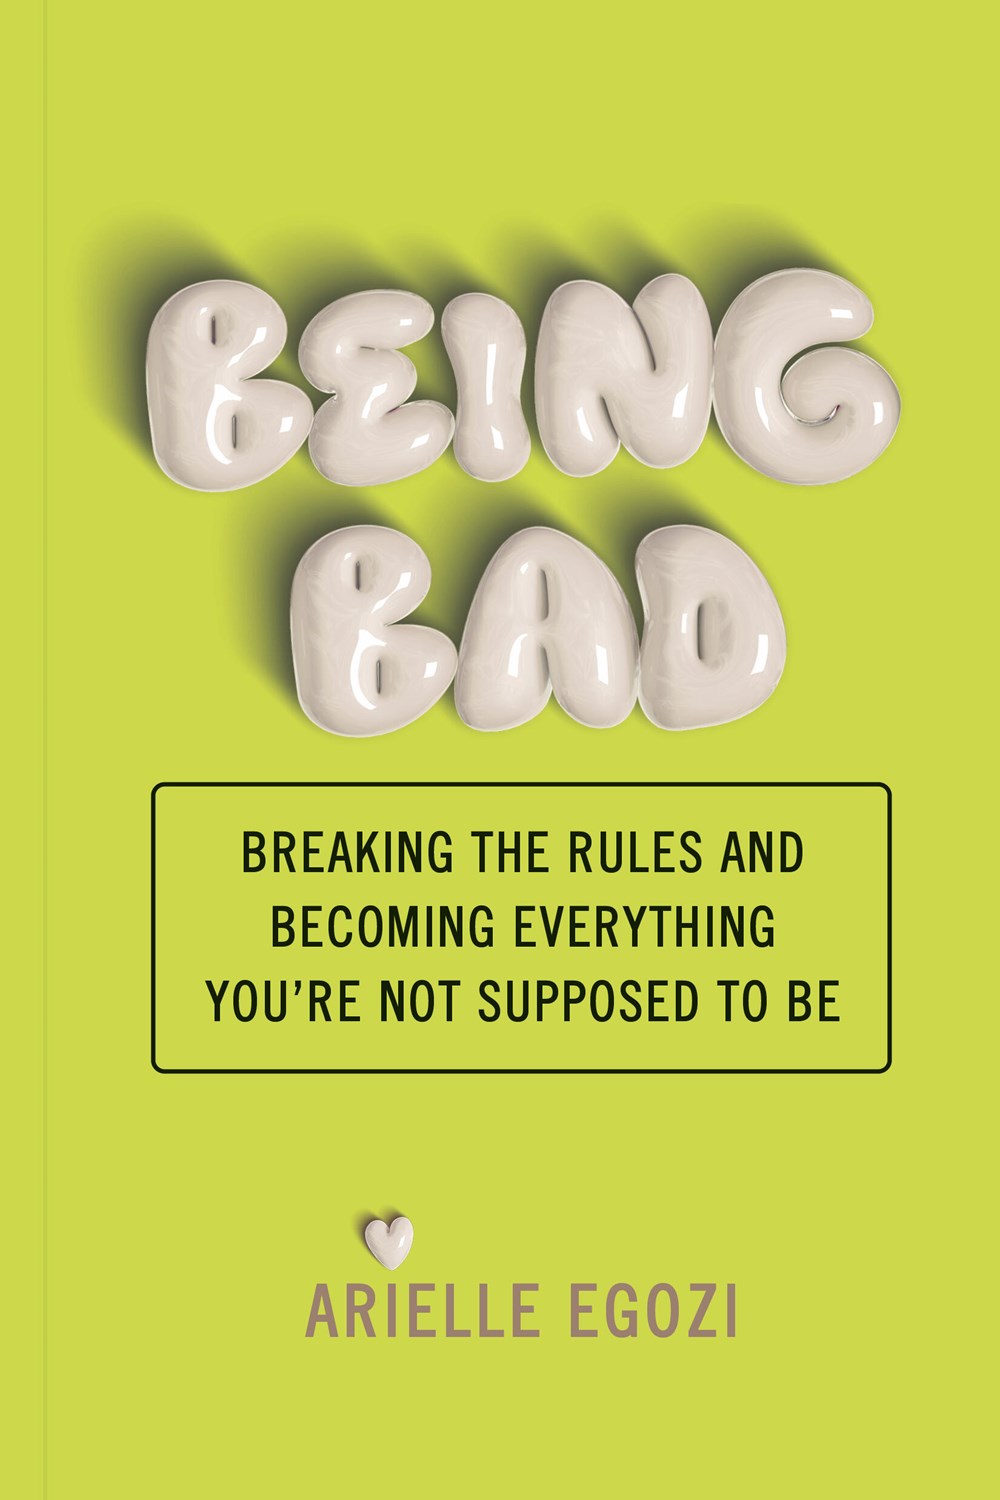 Being Bad: Breaking the Rules and Becoming Everything You’re Not Supposed To Be